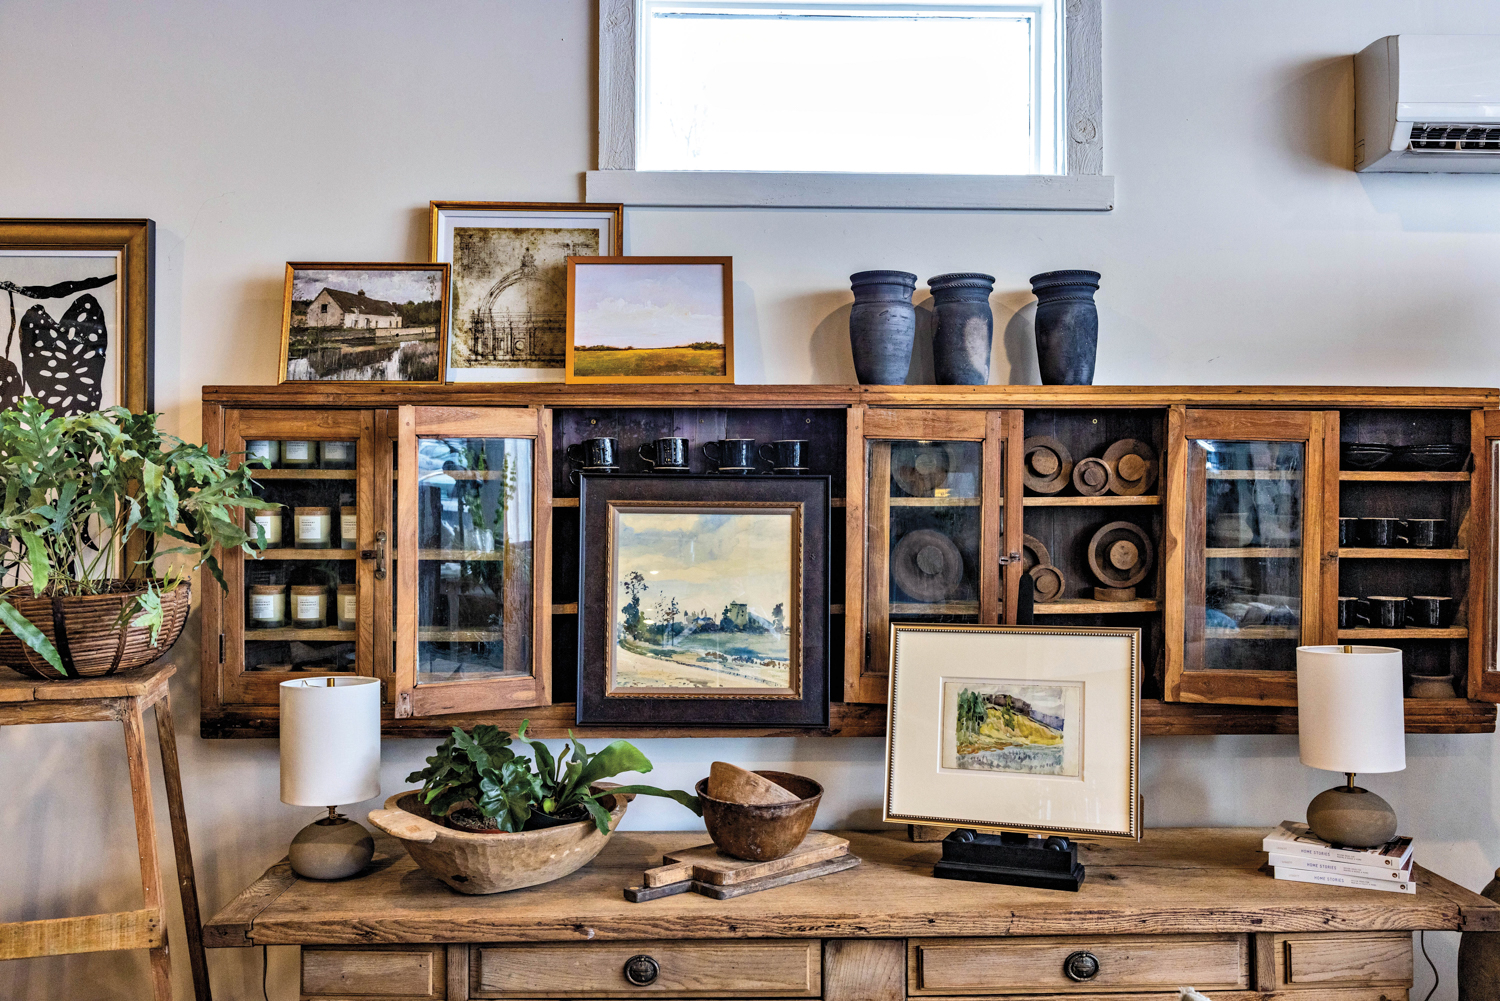 Woden display case mounted on wall with vases, mugs, artwork and other antiques on display